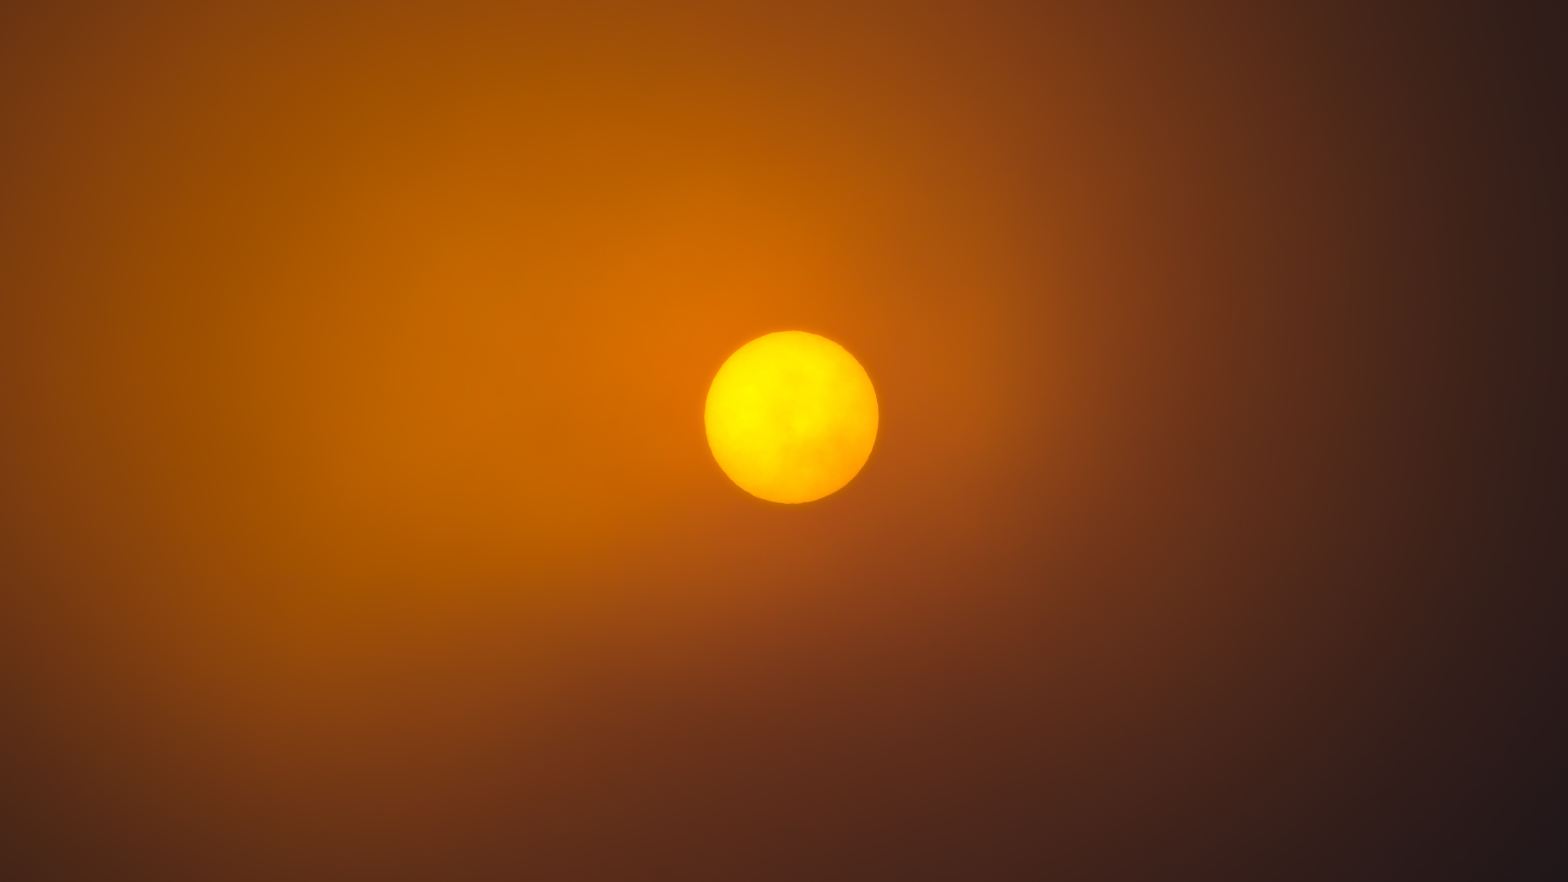 The orange disk of the sun, darkened by smoke or clouds